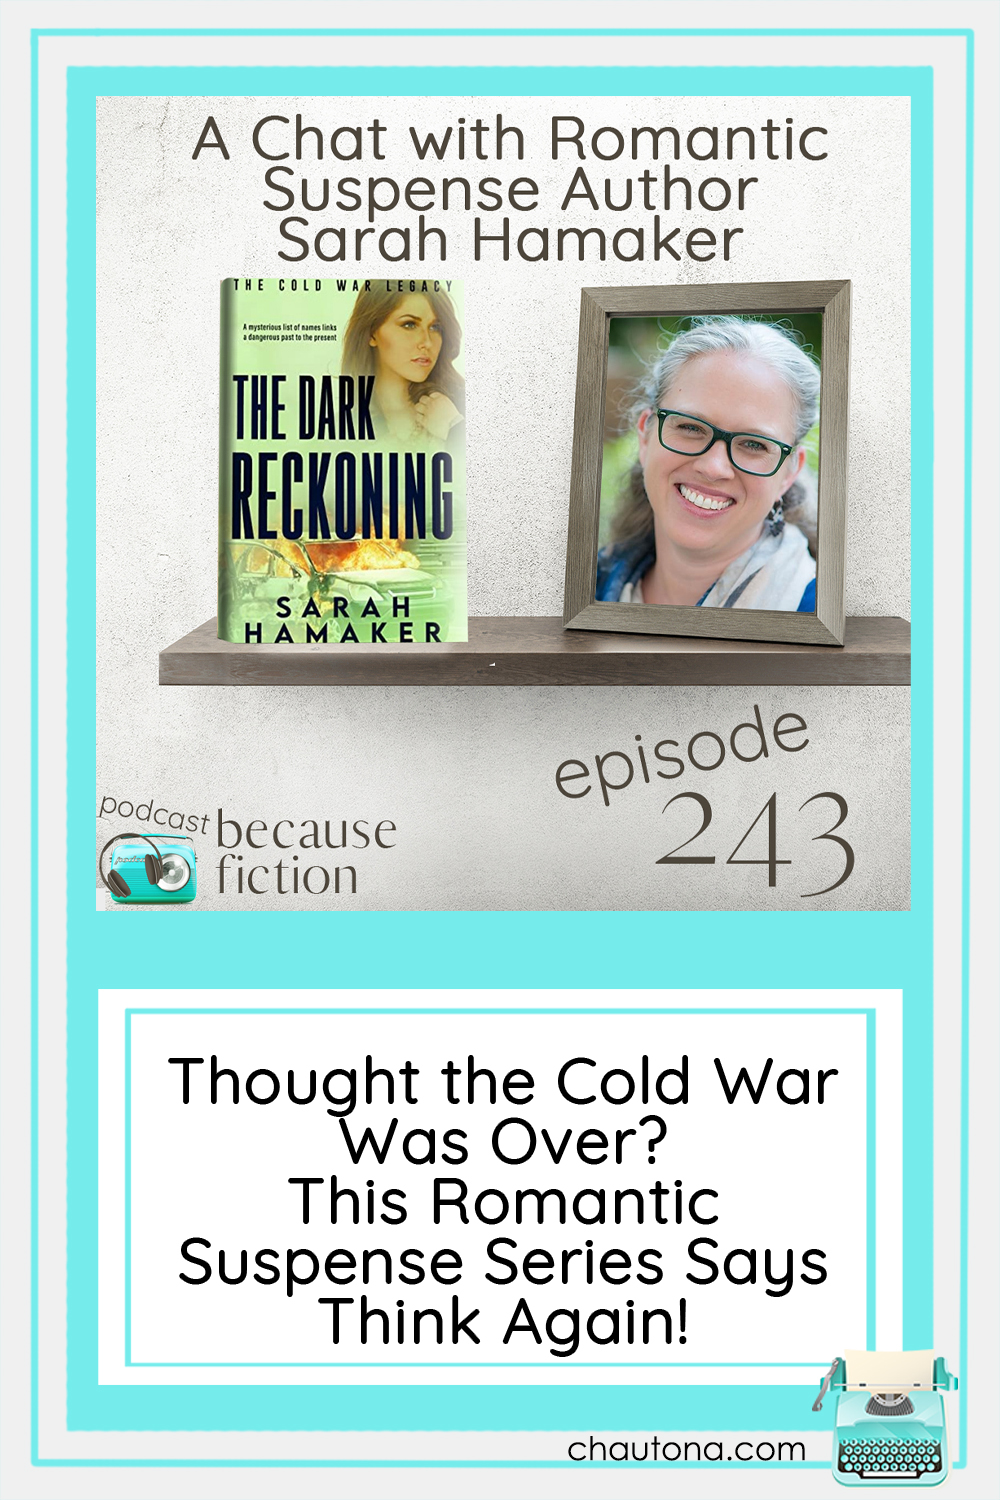 The Cold War may be over, but it still affects us today. Learn why in the Cold War Legacy series by Sarah Hamaker. via @chautonahavig